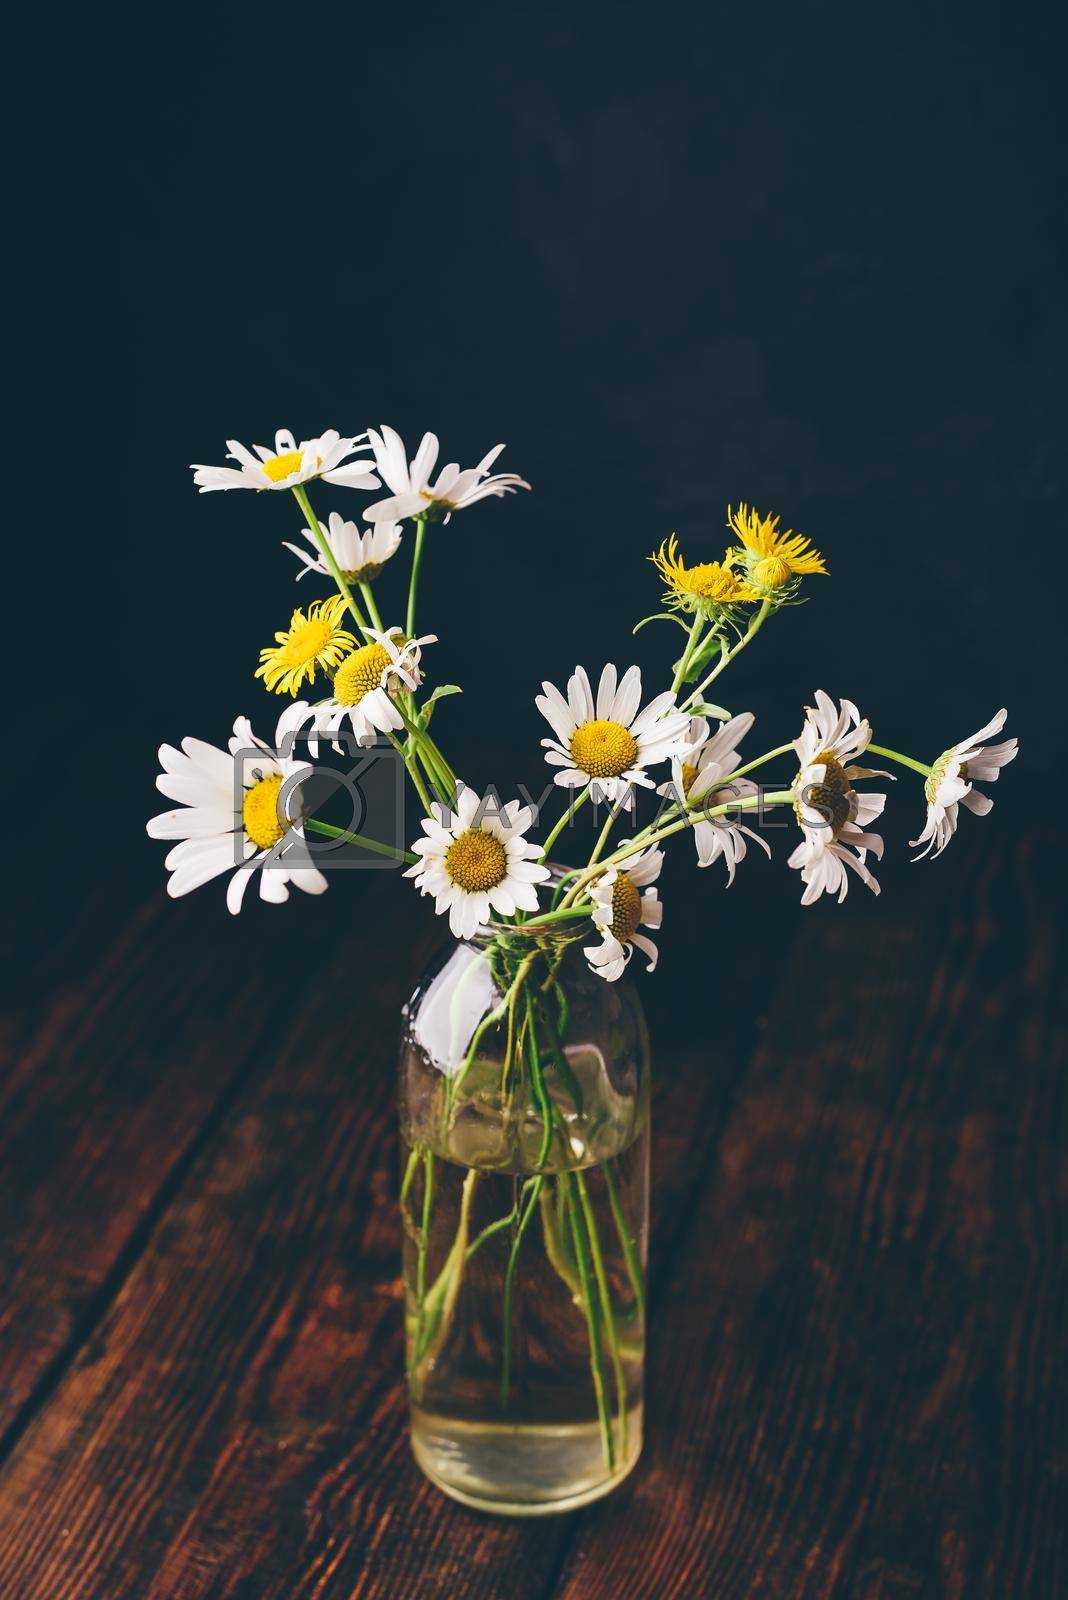 Royalty free image of Small bouquet of wild chamomile flowers by Seva_blsv